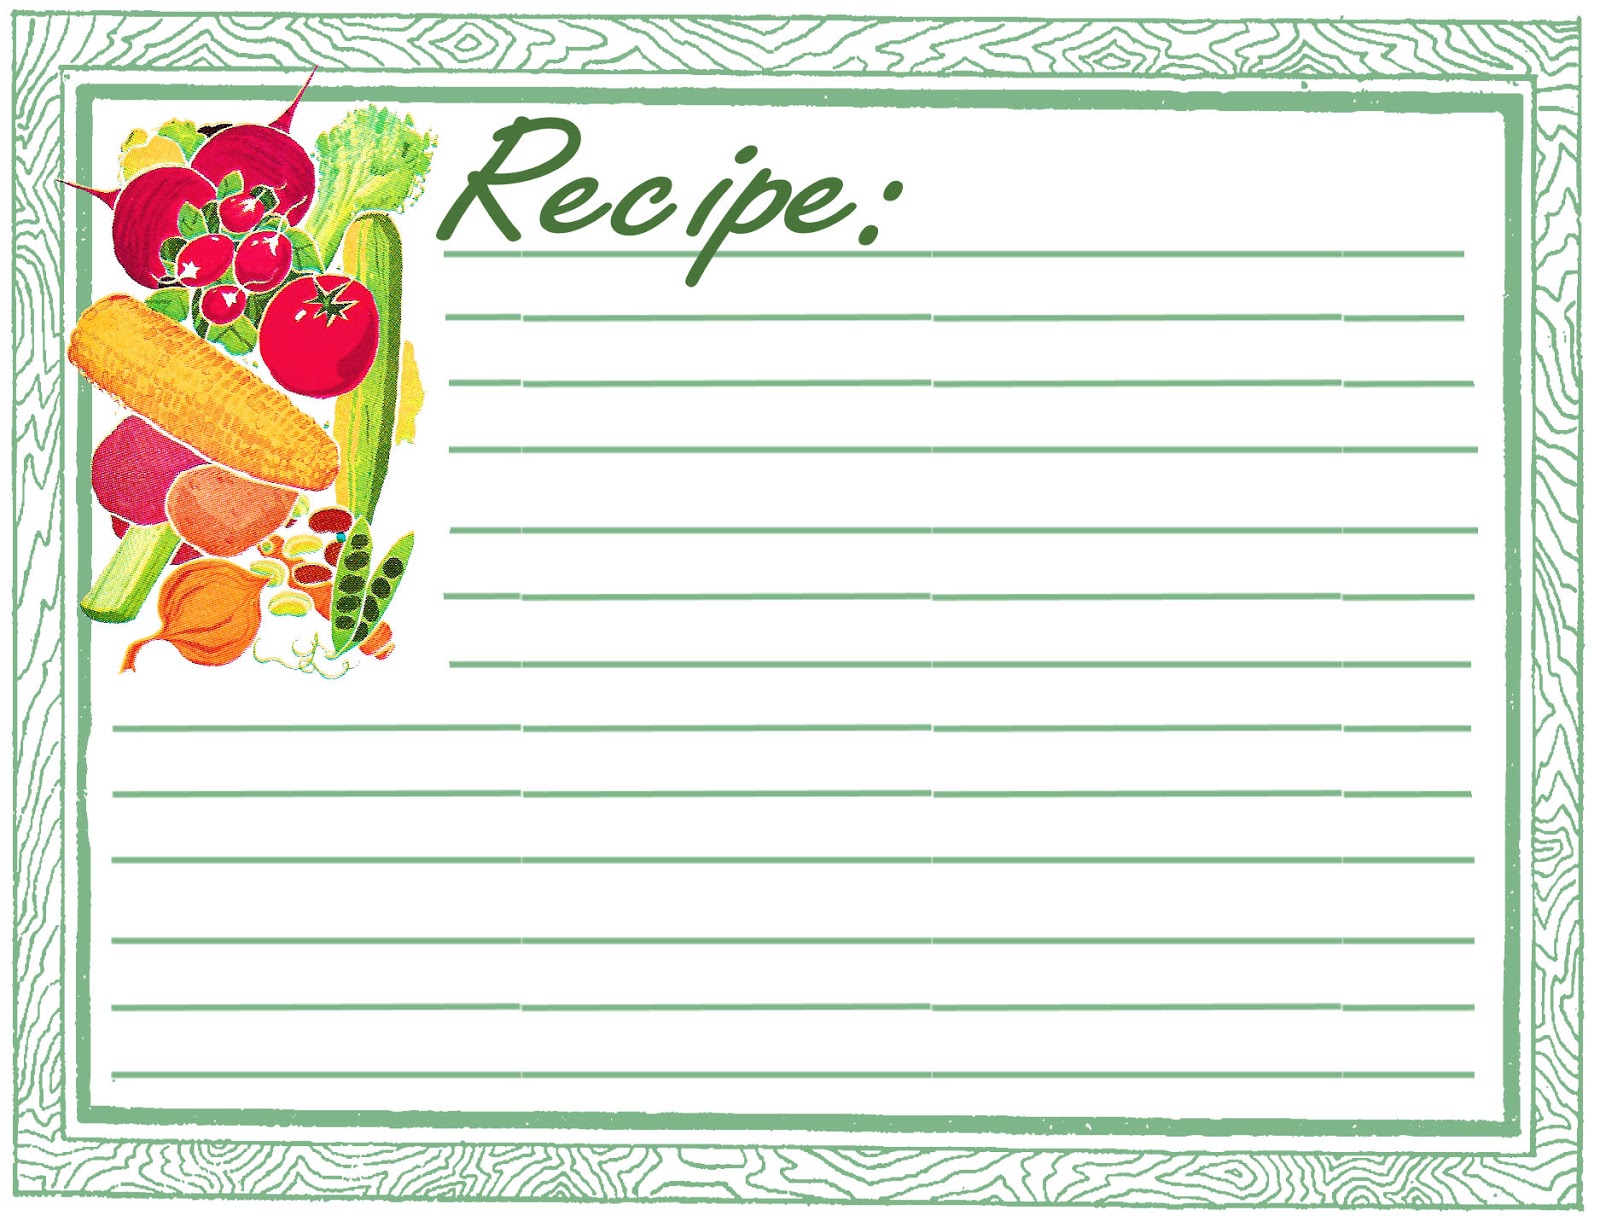 The Graphics Monarch Printable Recipe Card Design Vegetable Meal